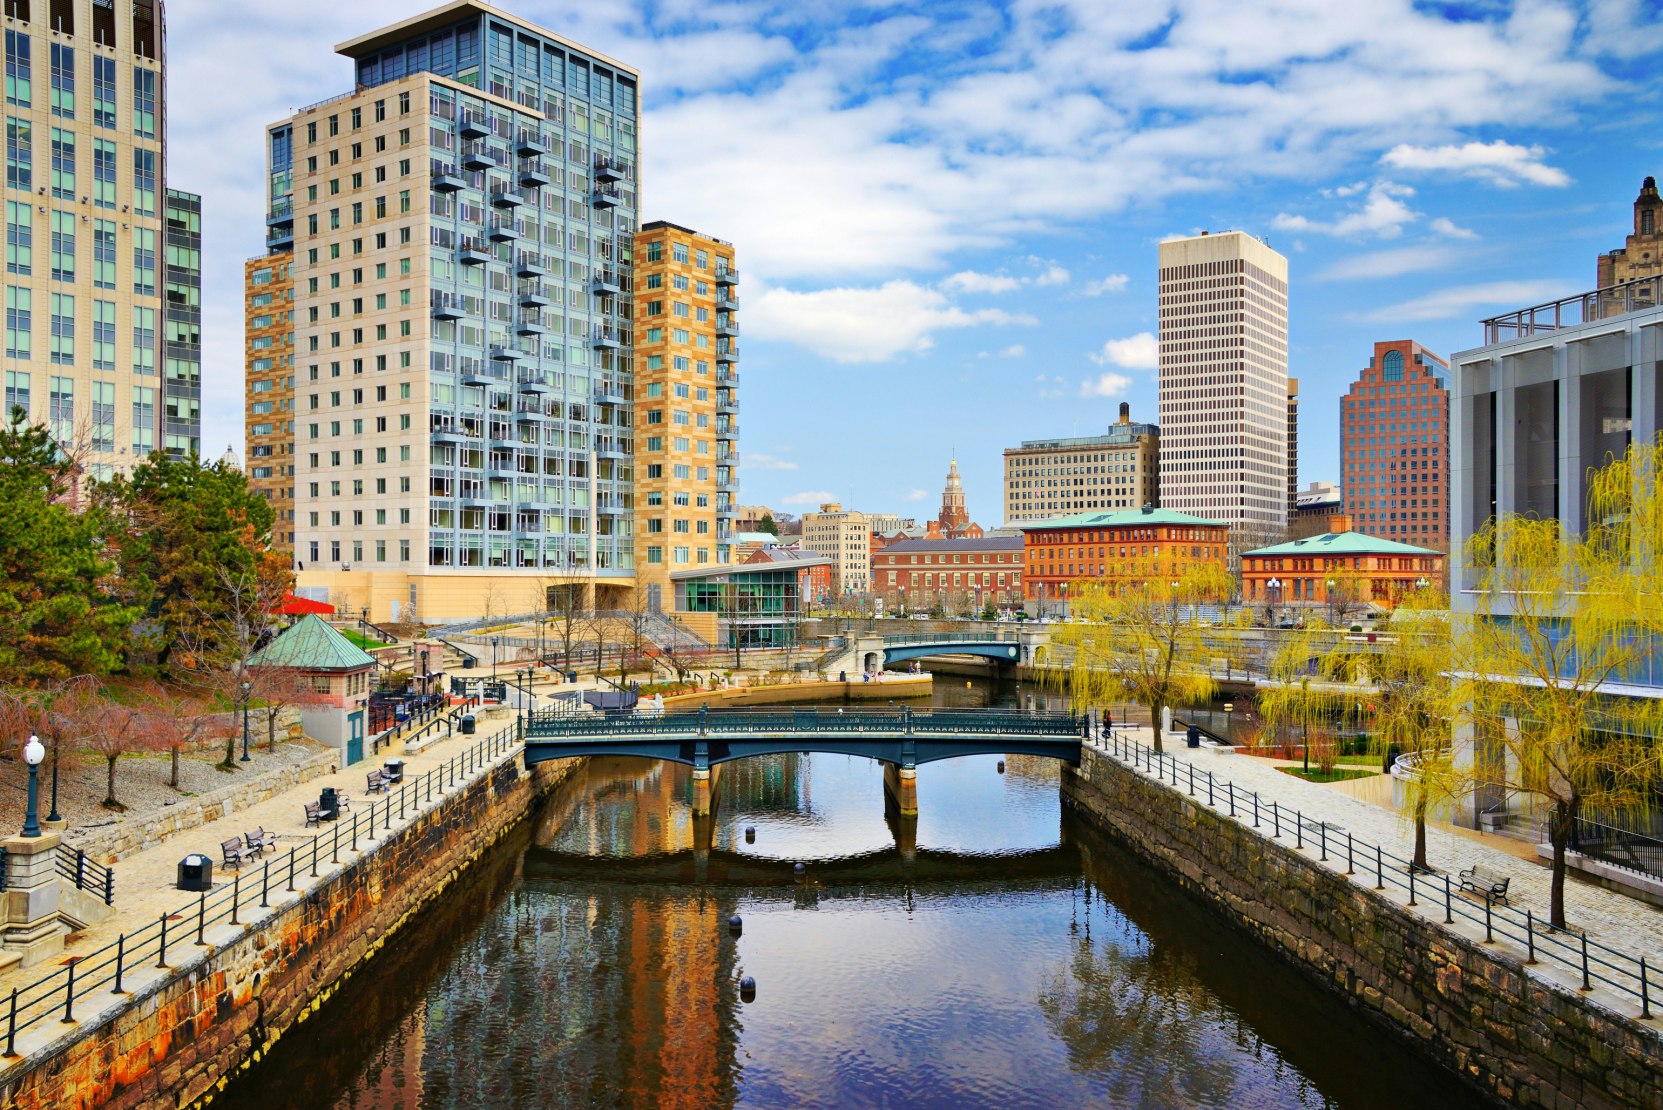 Providence, Rhode Island cityscape at Waterplace Park.; Shutterstock ID 150002120; Your name (First / Last): Lauren Keith; GL account no.: 65050; Netsuite department name: Content Asset; Full Product or Project name including edition: Guides Project Eastern USA